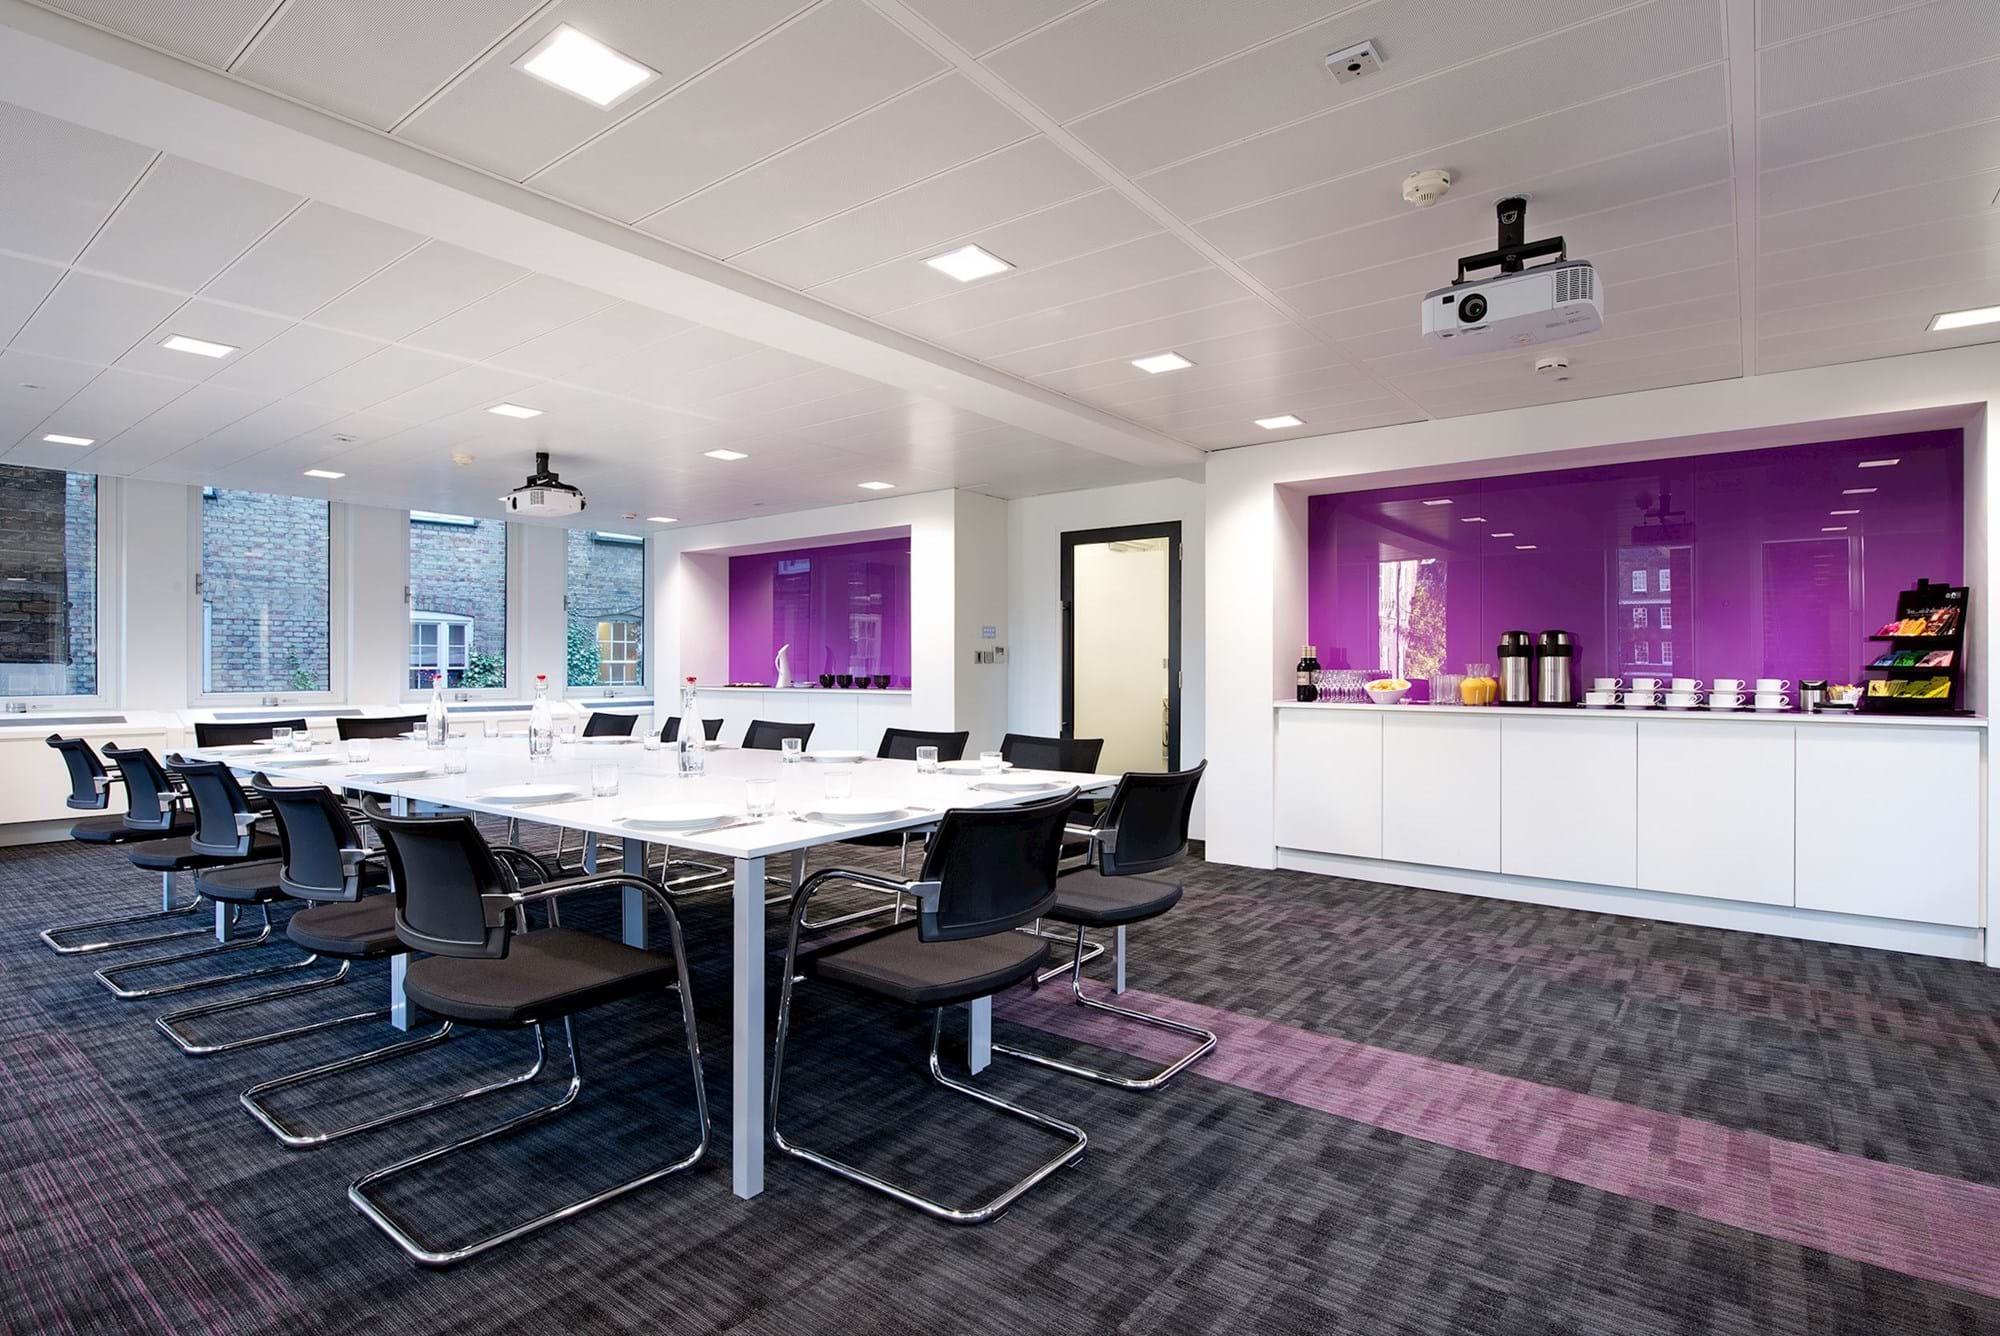 Modus Workspace office design, fit out and refurbishment - Hardwicke Chambers - Meeting Room - Hardwicke04_highres_sRGB.jpg